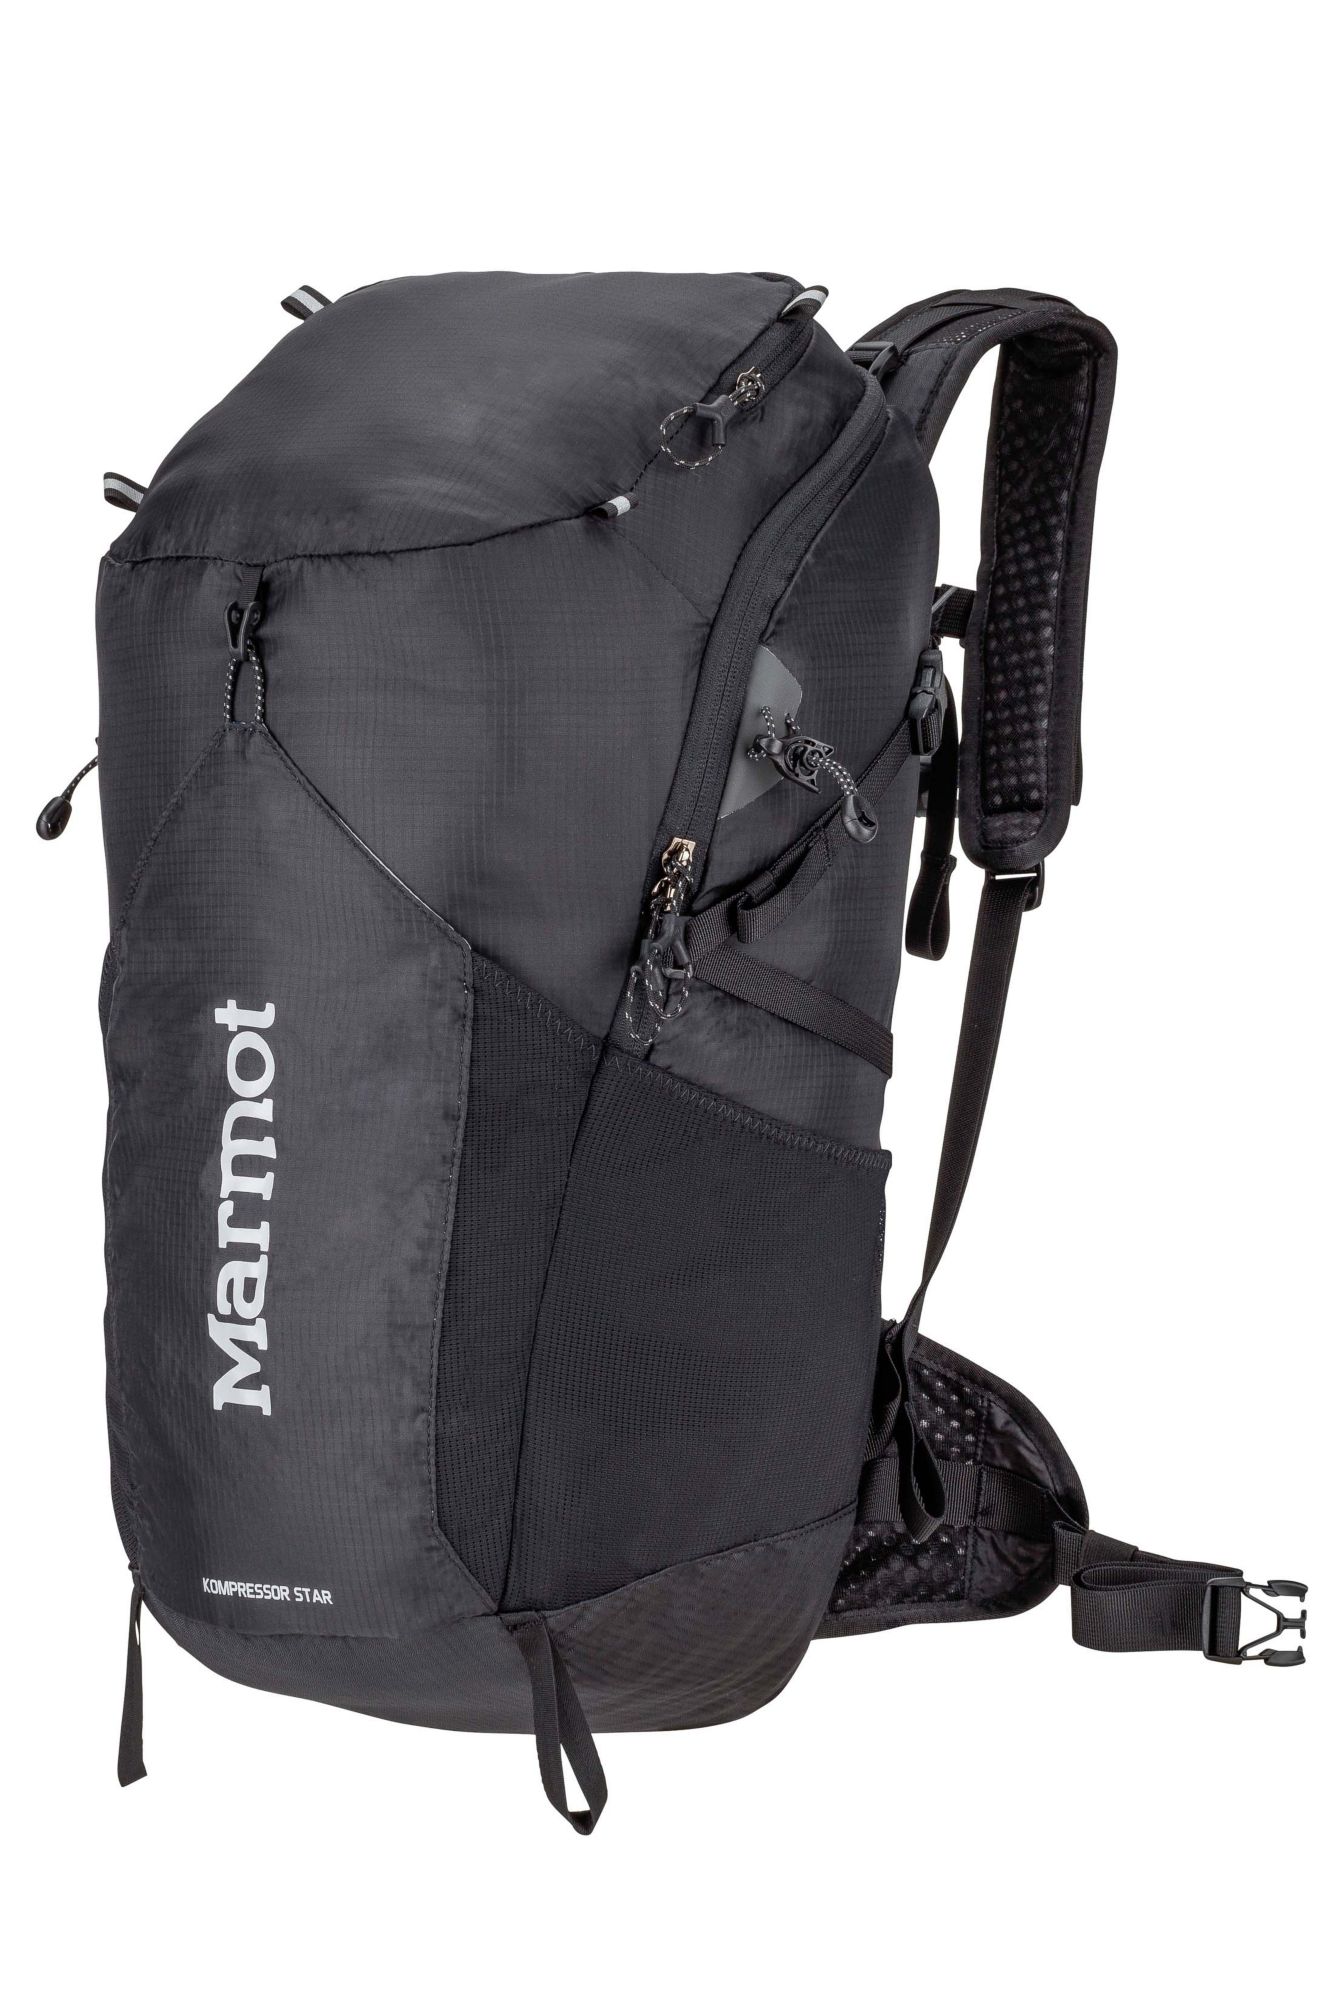 Marmot Ultra Kompressor Backpack 22L Lightwieght Day Hiking 4 color available 